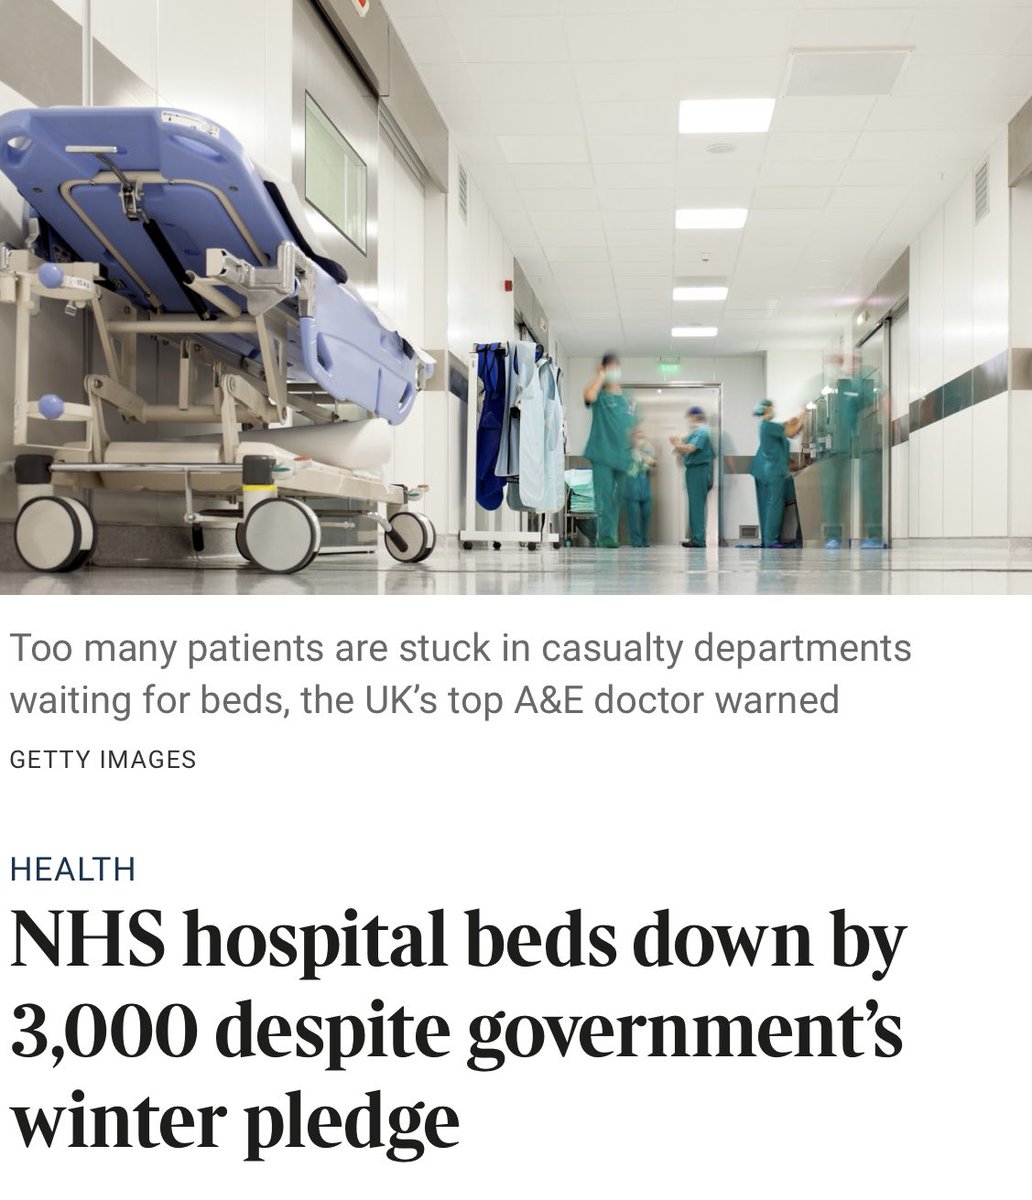 The Government promised 5,000 extra beds. But the NHS actually has 3,000 FEWER beds going into winter. Please RT if you think everyone should be aware. thetimes.co.uk/article/nhs-ho….